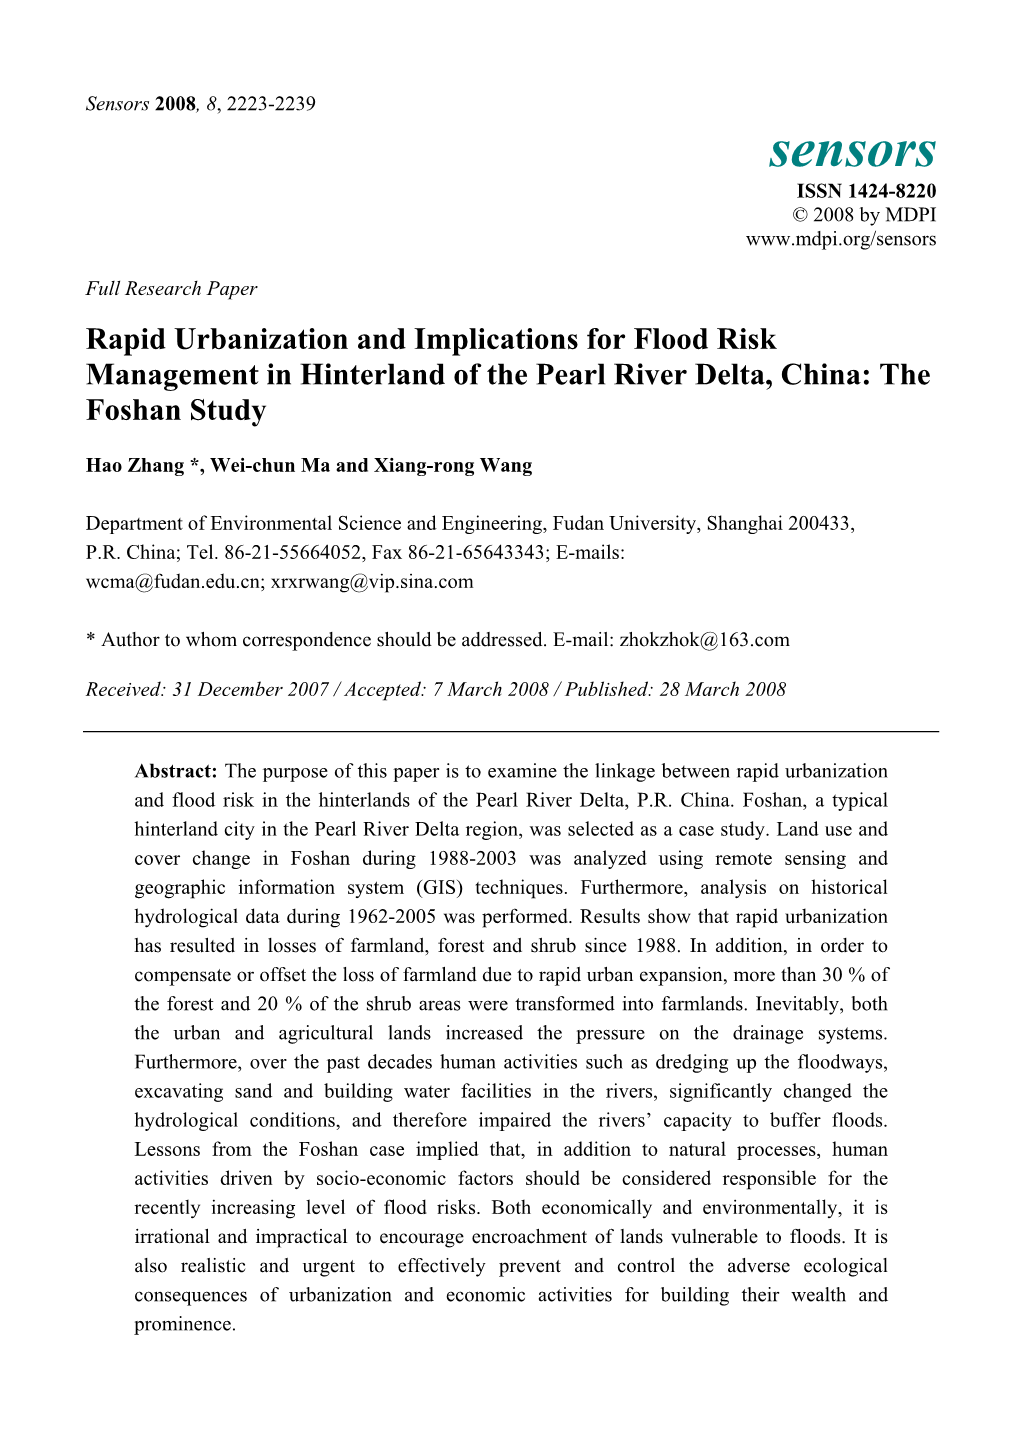 Rapid Urbanization and Implications for Flood Risk Management in Hinterland of the Pearl River Delta, China: the Foshan Study